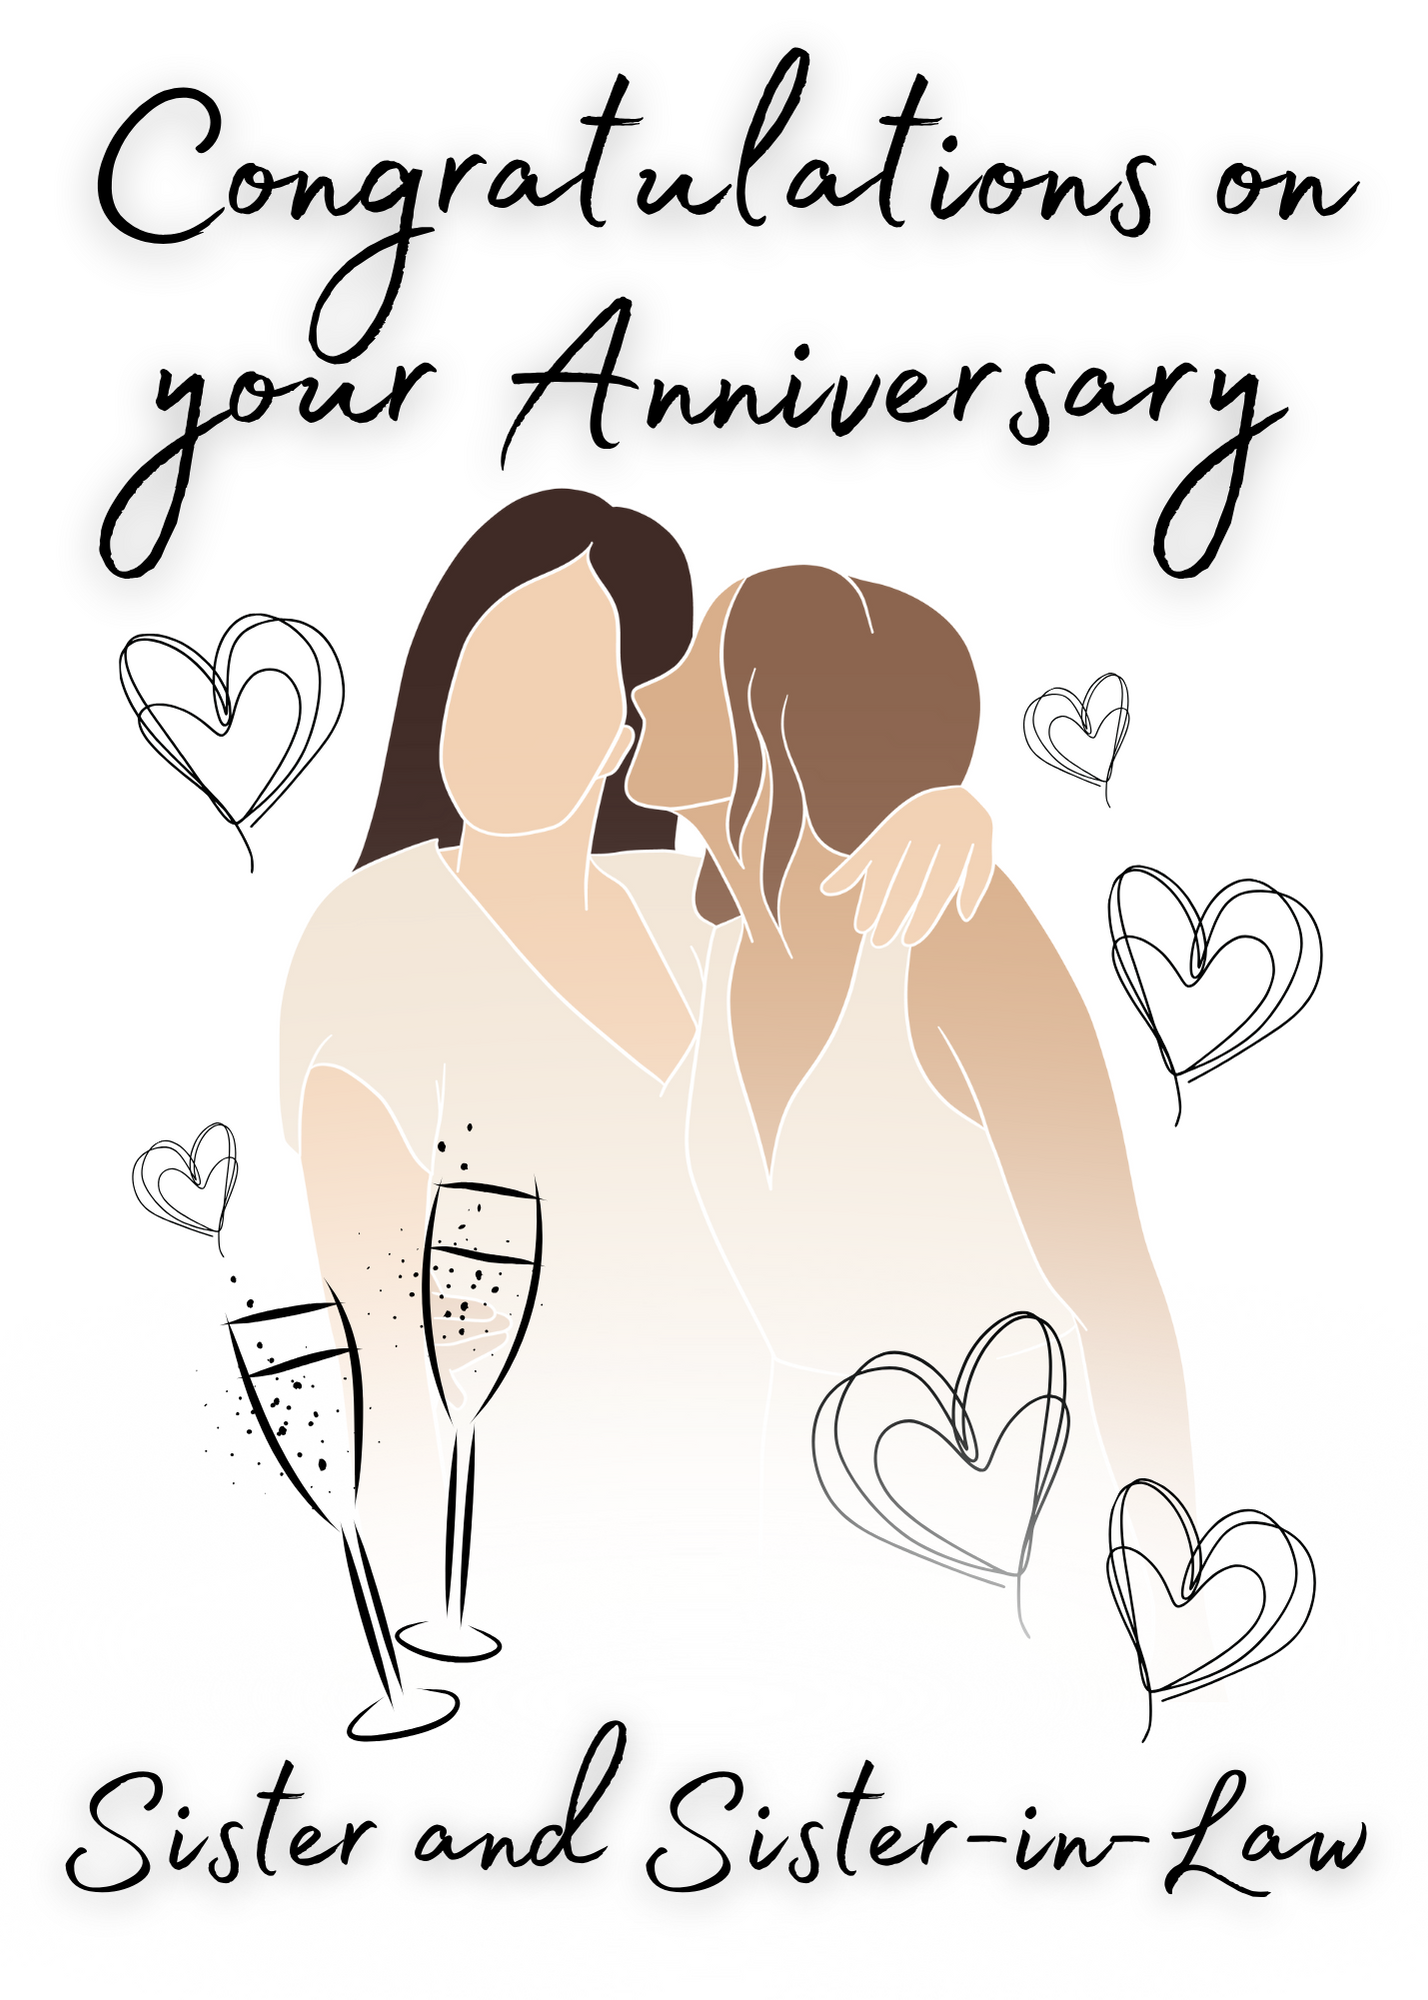 Sister and Sister-in-Law Anniversary Card